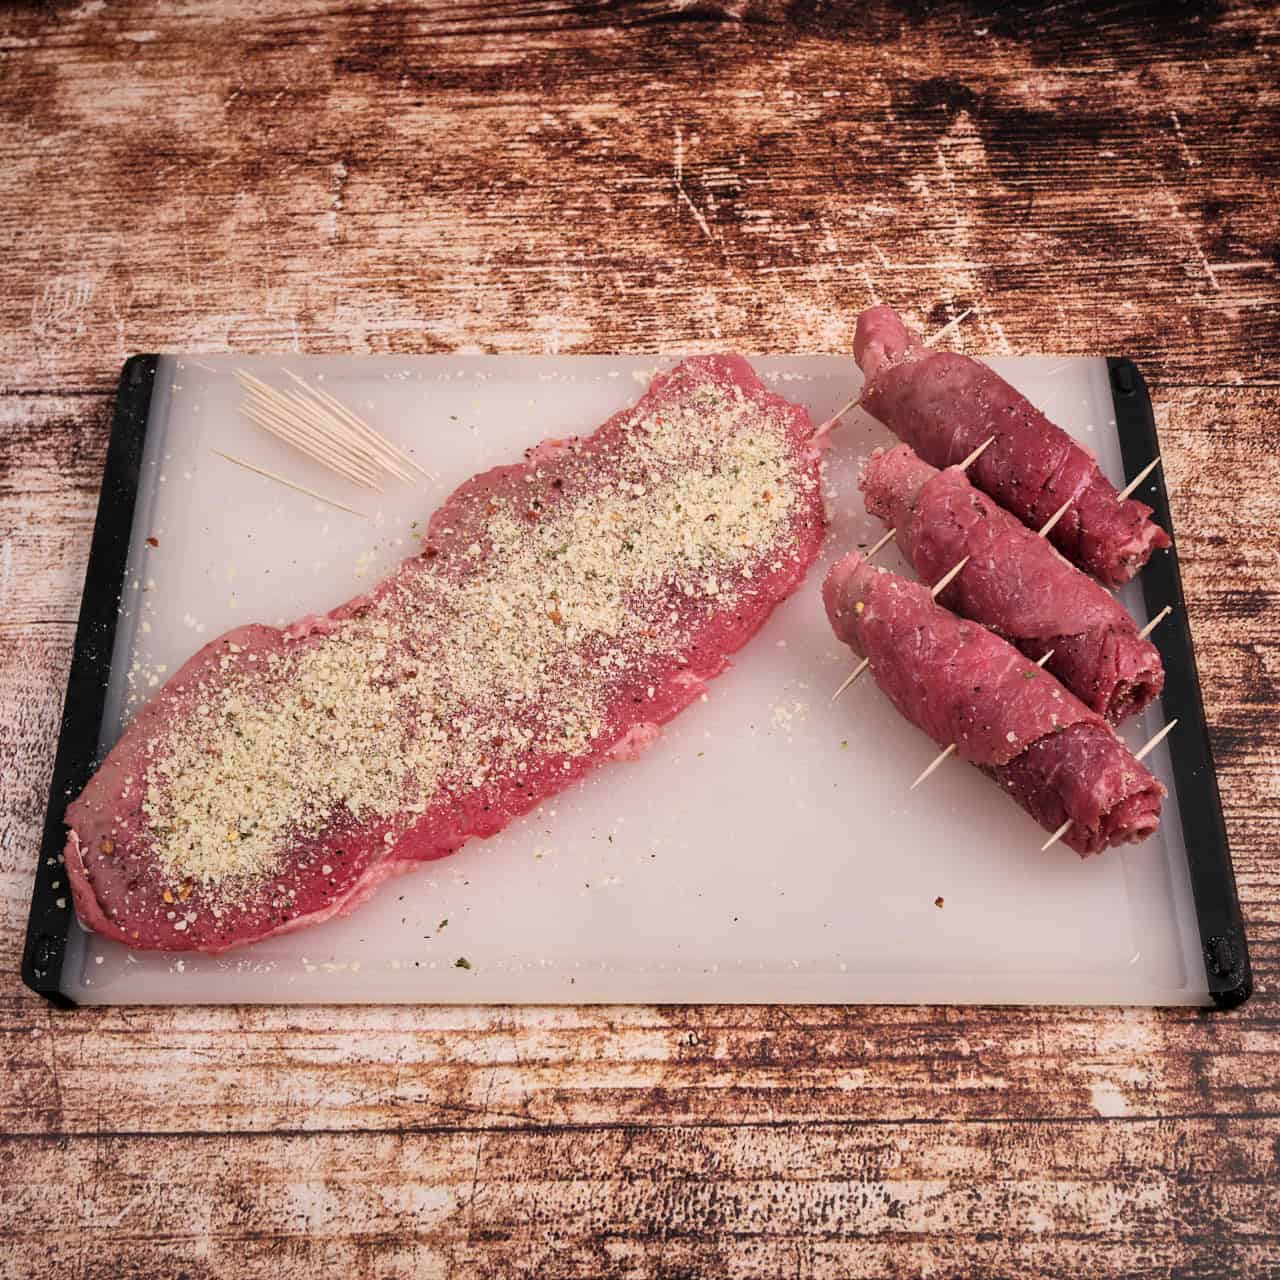 A slice of beef sprinkled with the filling, with toothpicks and a few beef rolls next to it